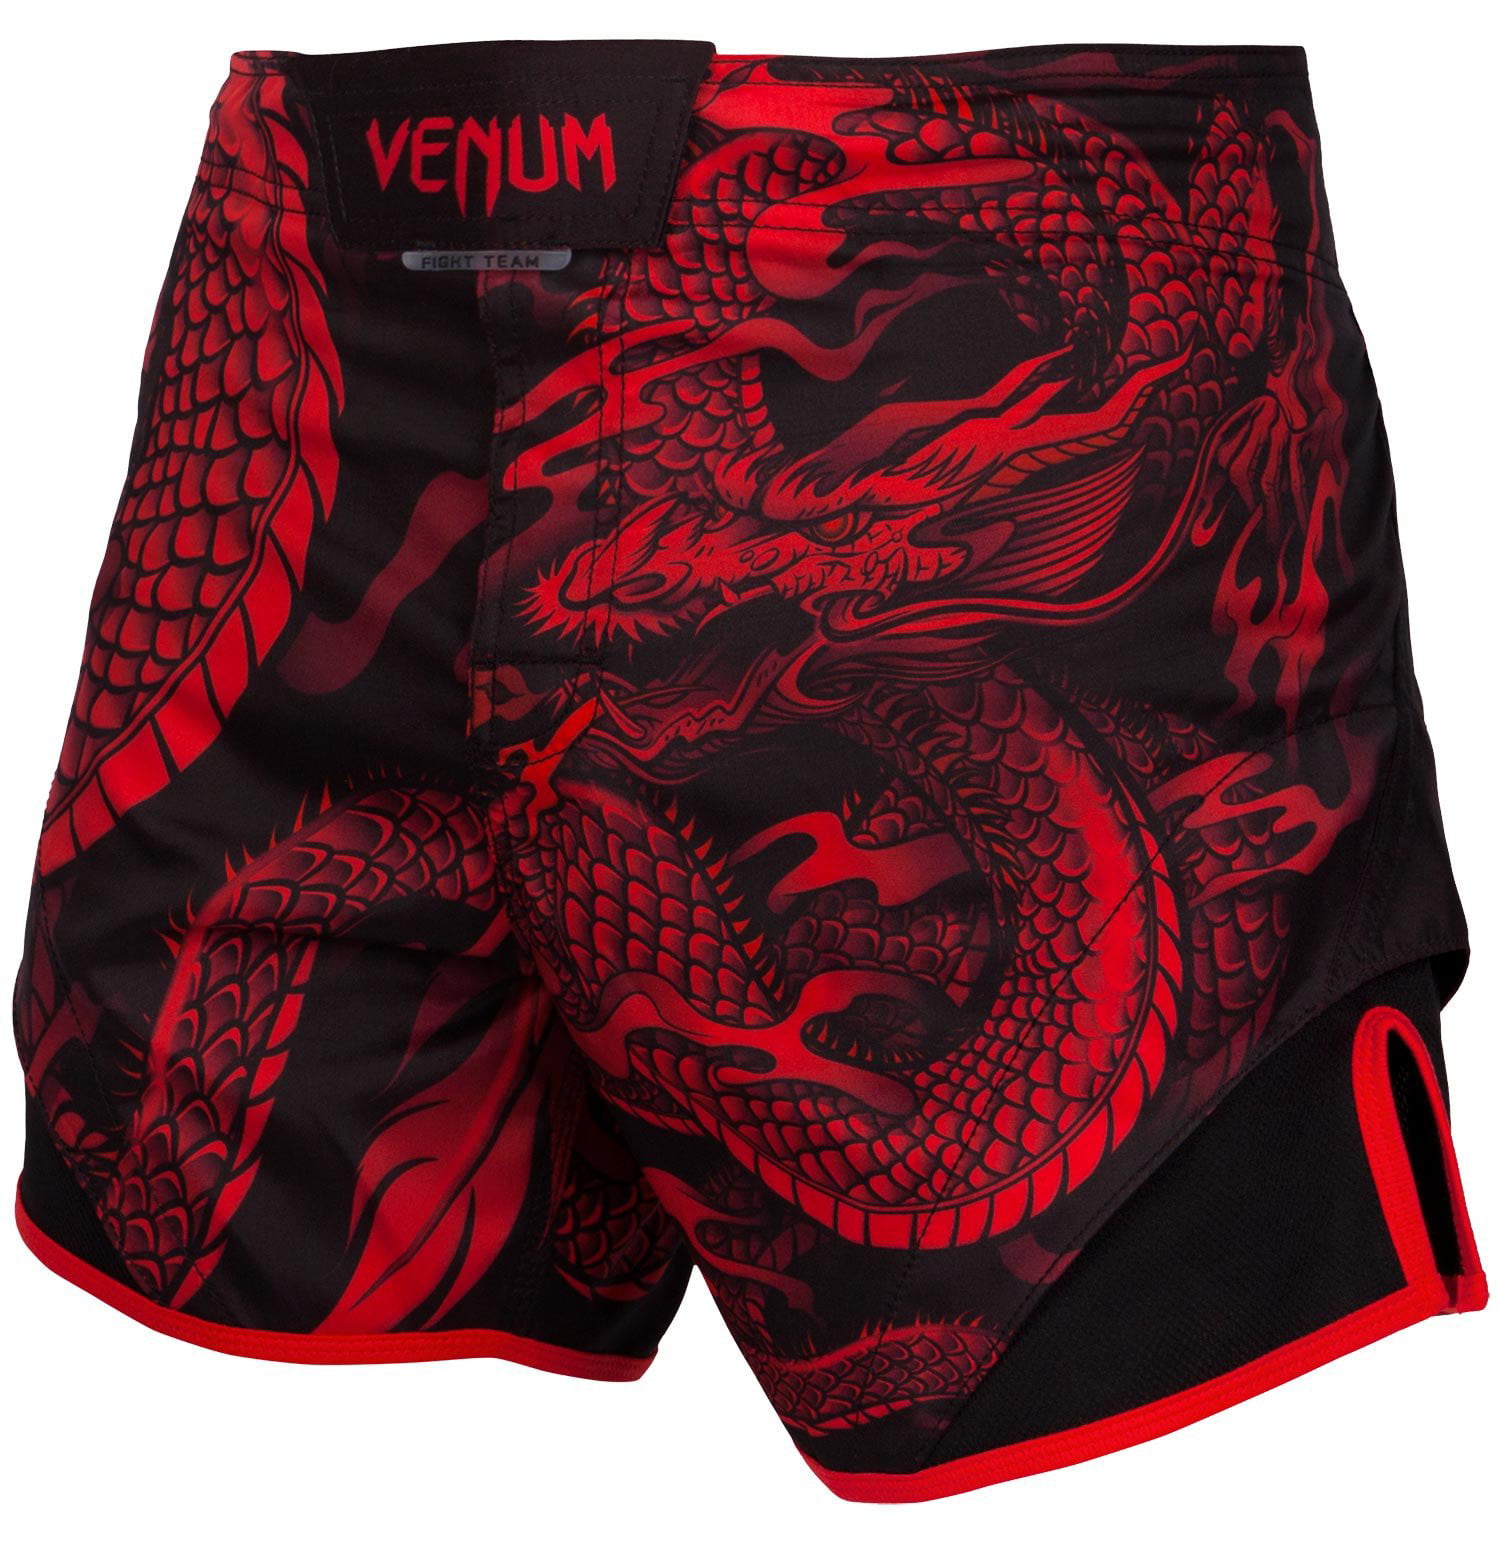 DRAGON Wears MMA Fight Shorts Grappling Short Kick Boxing Cage Fighting Shorts 